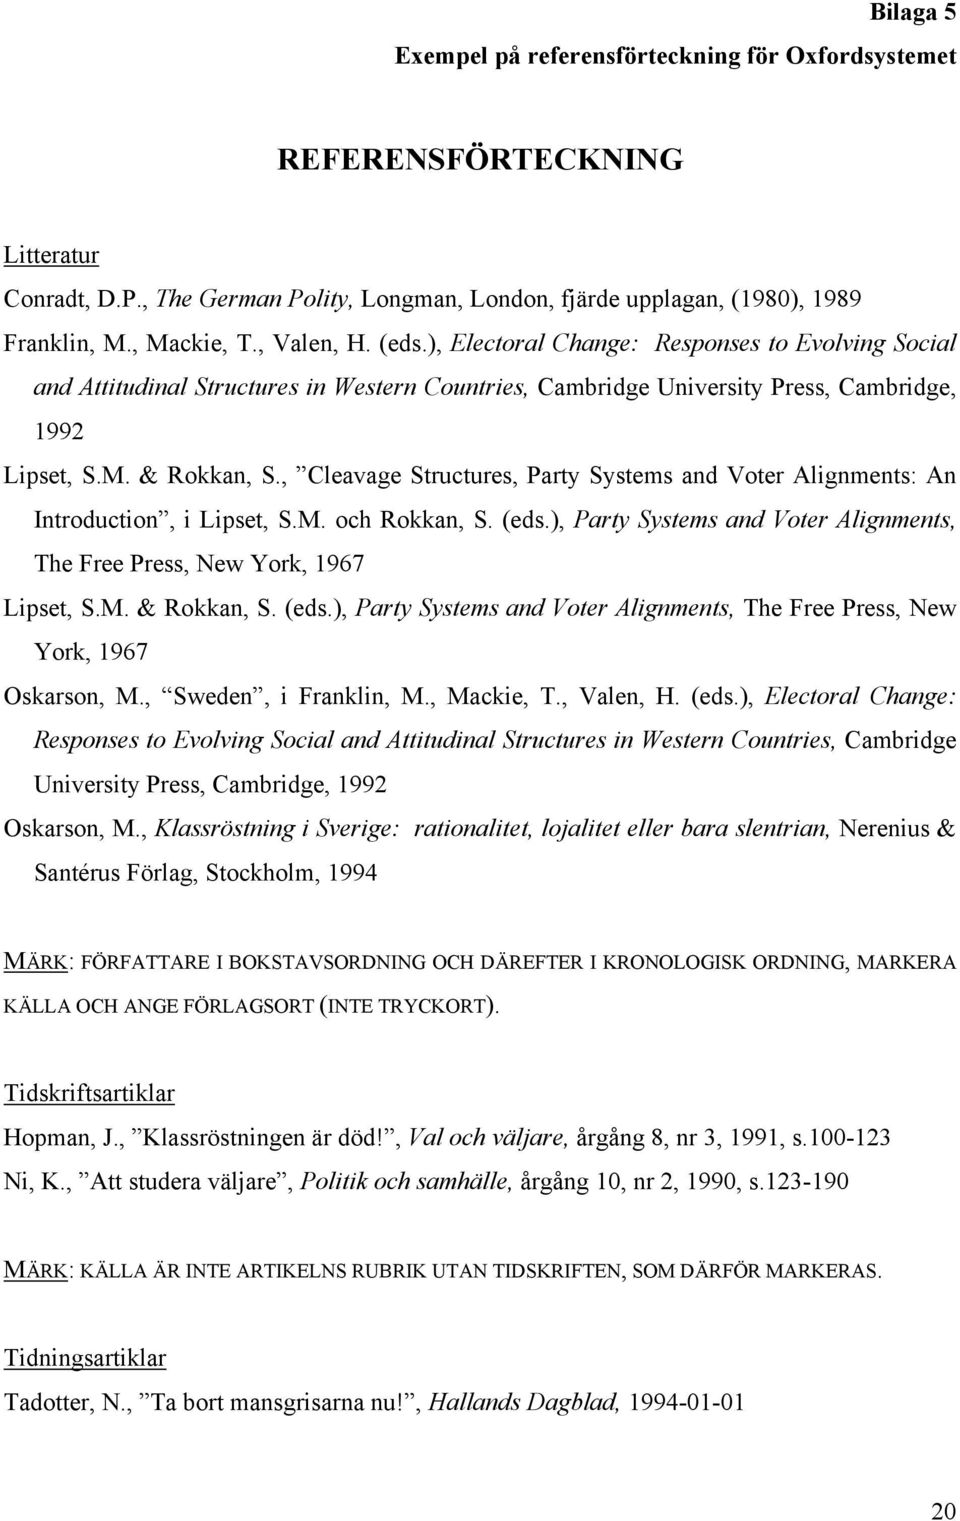 , Cleavage Structures, Party Systems and Voter Alignments: An Introduction, i Lipset, S.M. och Rokkan, S. (eds.), Party Systems and Voter Alignments, The Free Press, New York, 1967 Lipset, S.M. & Rokkan, S.